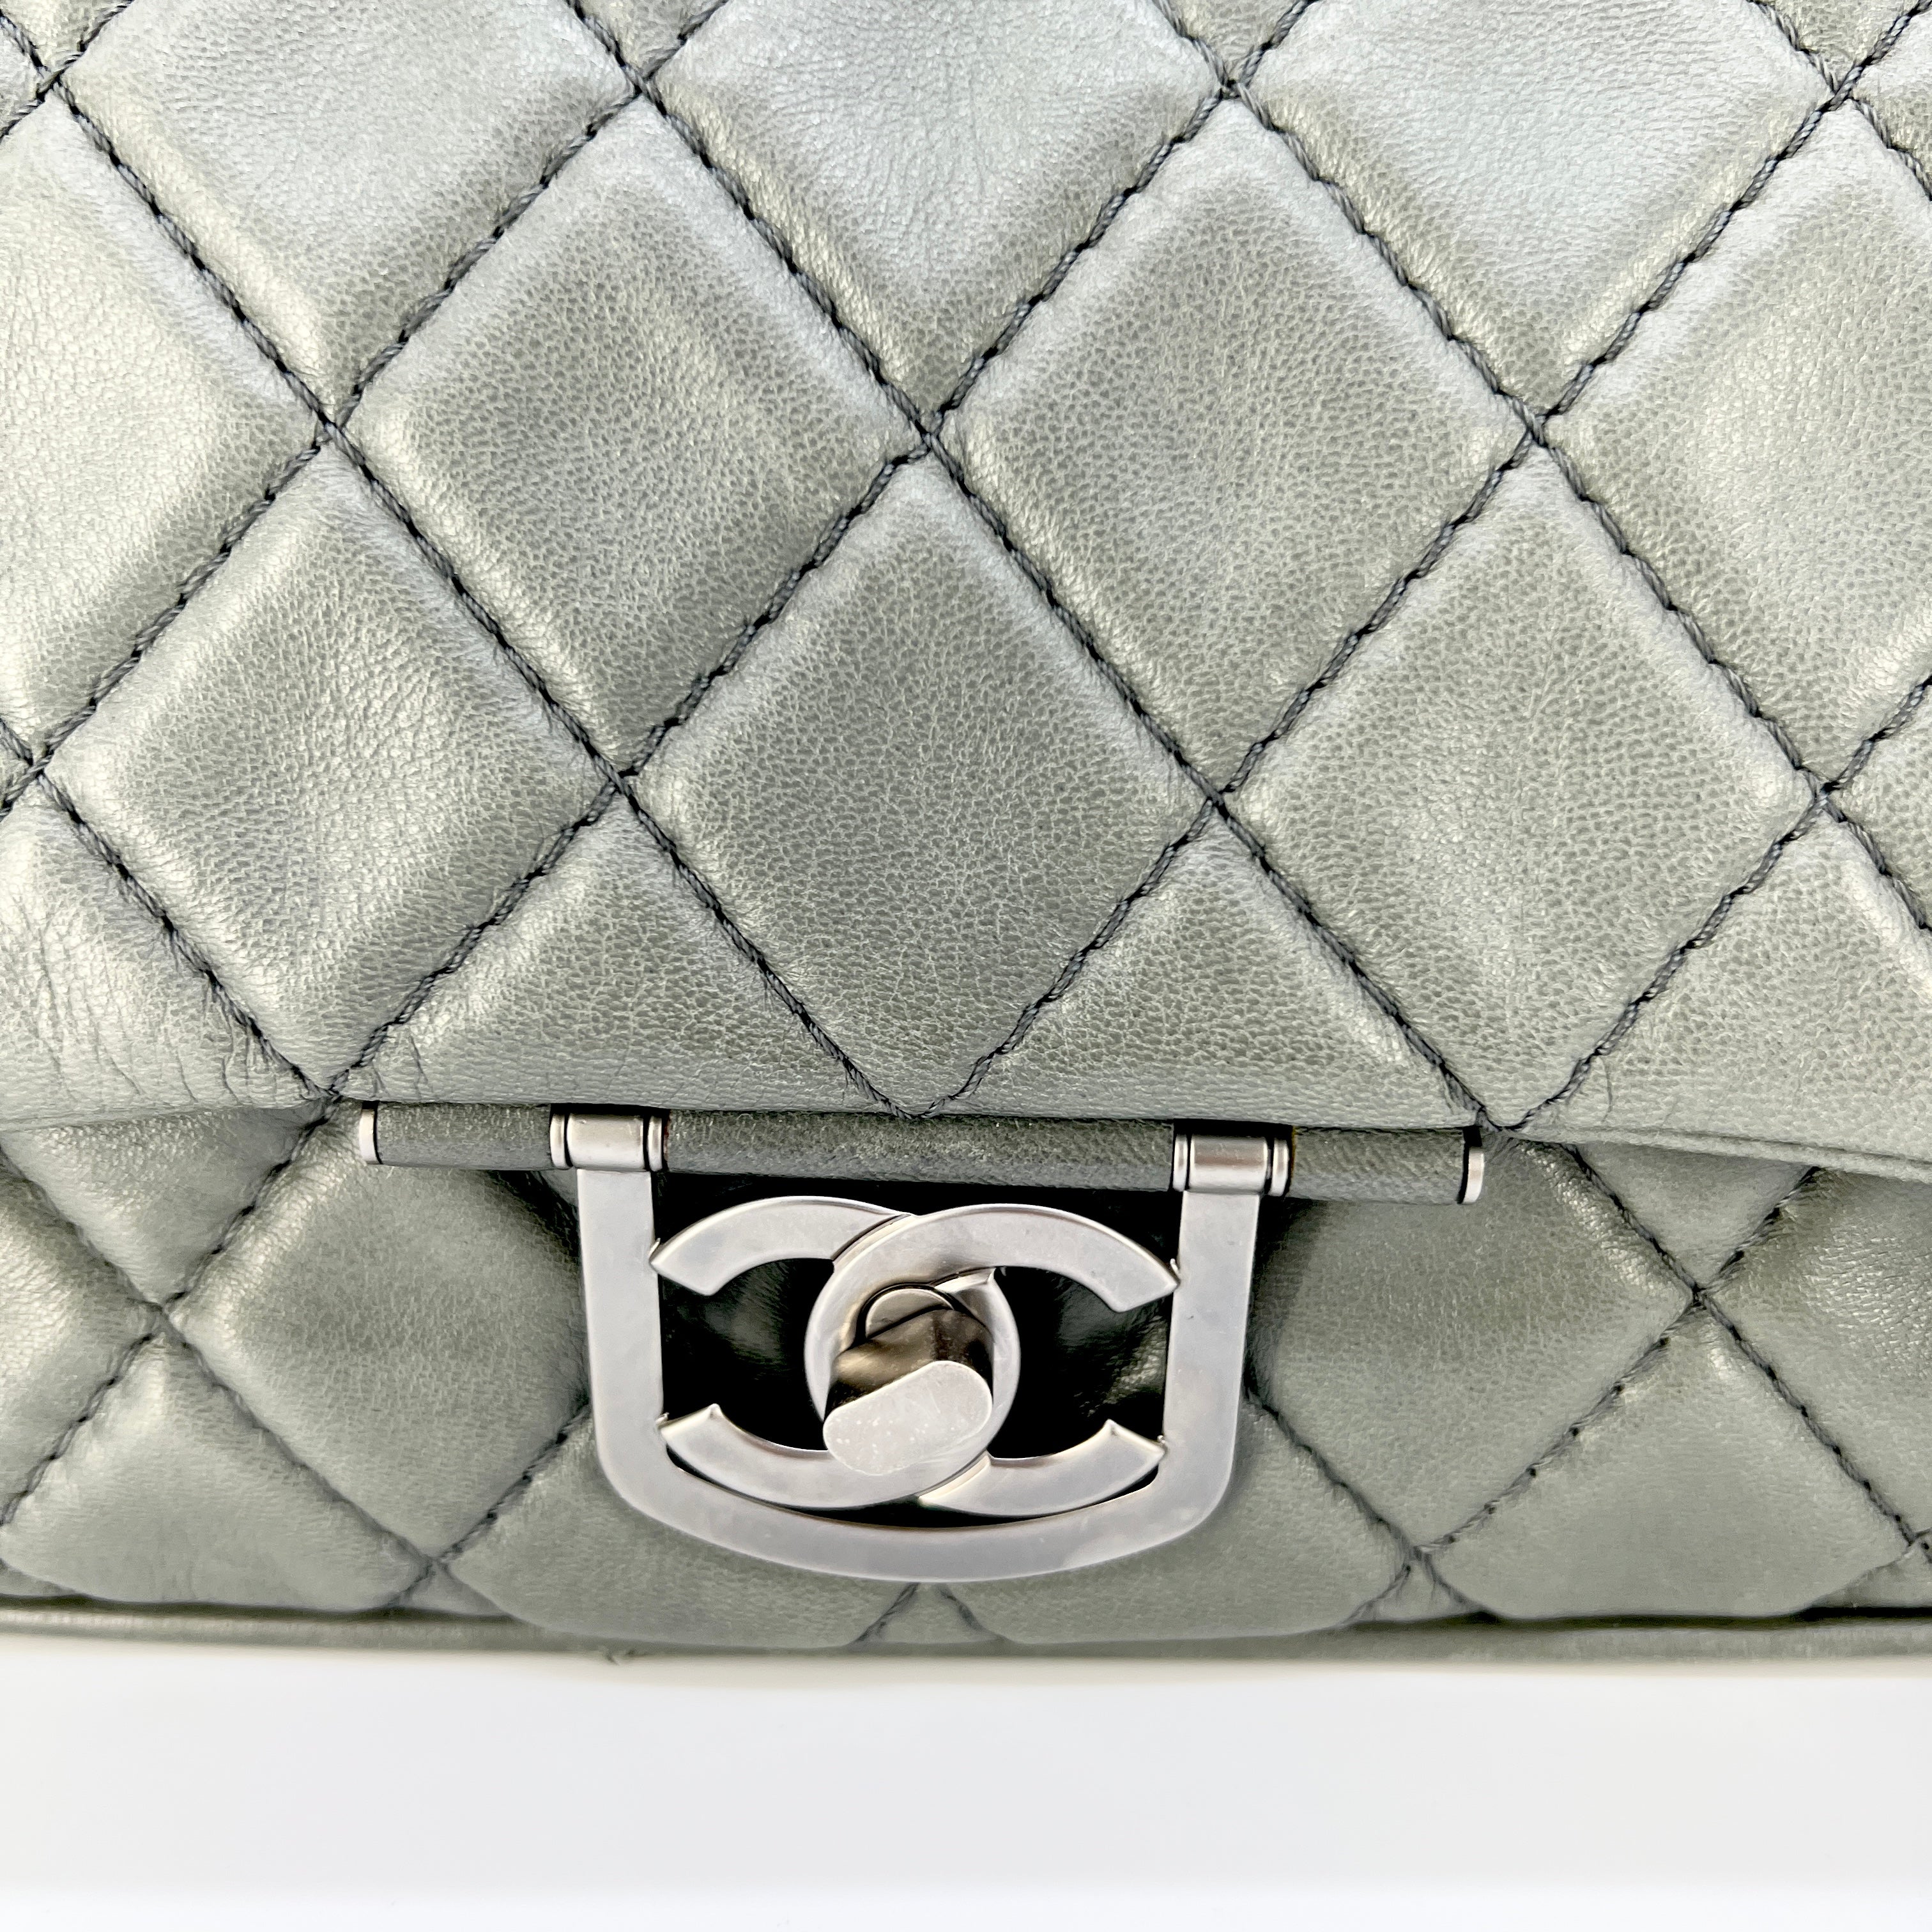 CHANEL Quilted Tote Gray [Guaranteed Authentic]